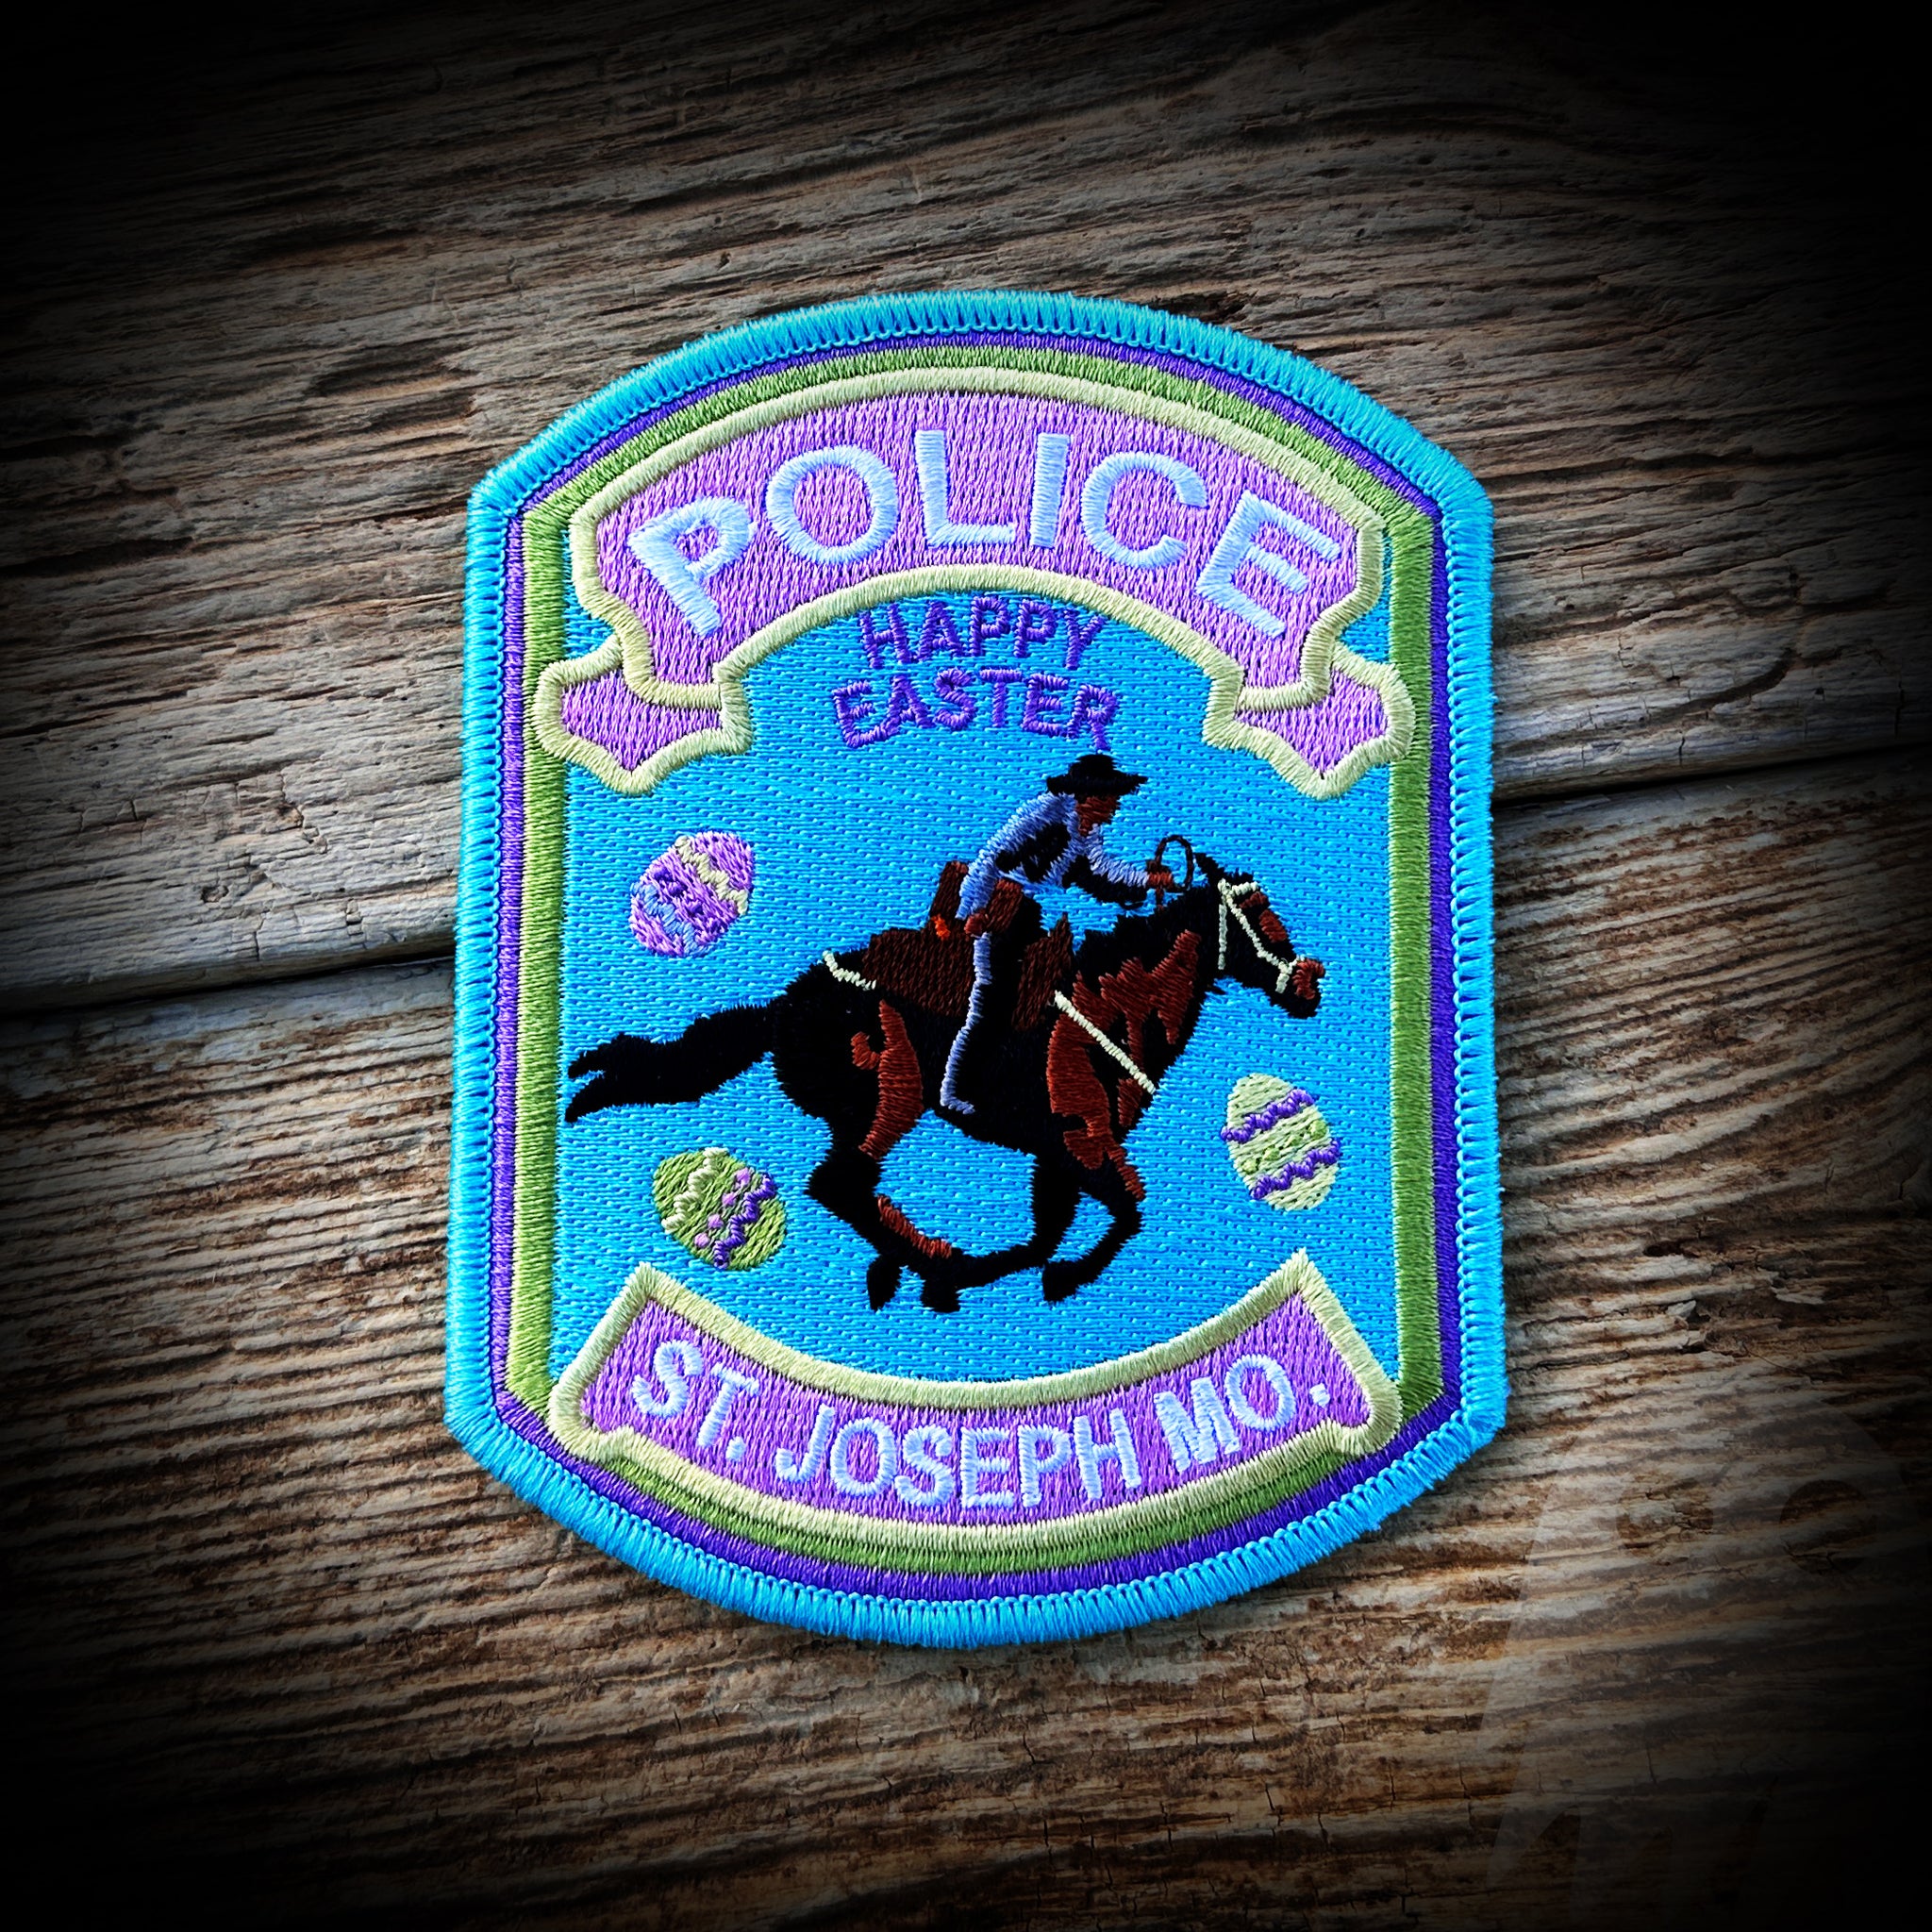 EASTER ORIGINAL - St. Joseph, MO Police Department 2023 Easter Traditional Patch - LIMITED AUTHENTIC